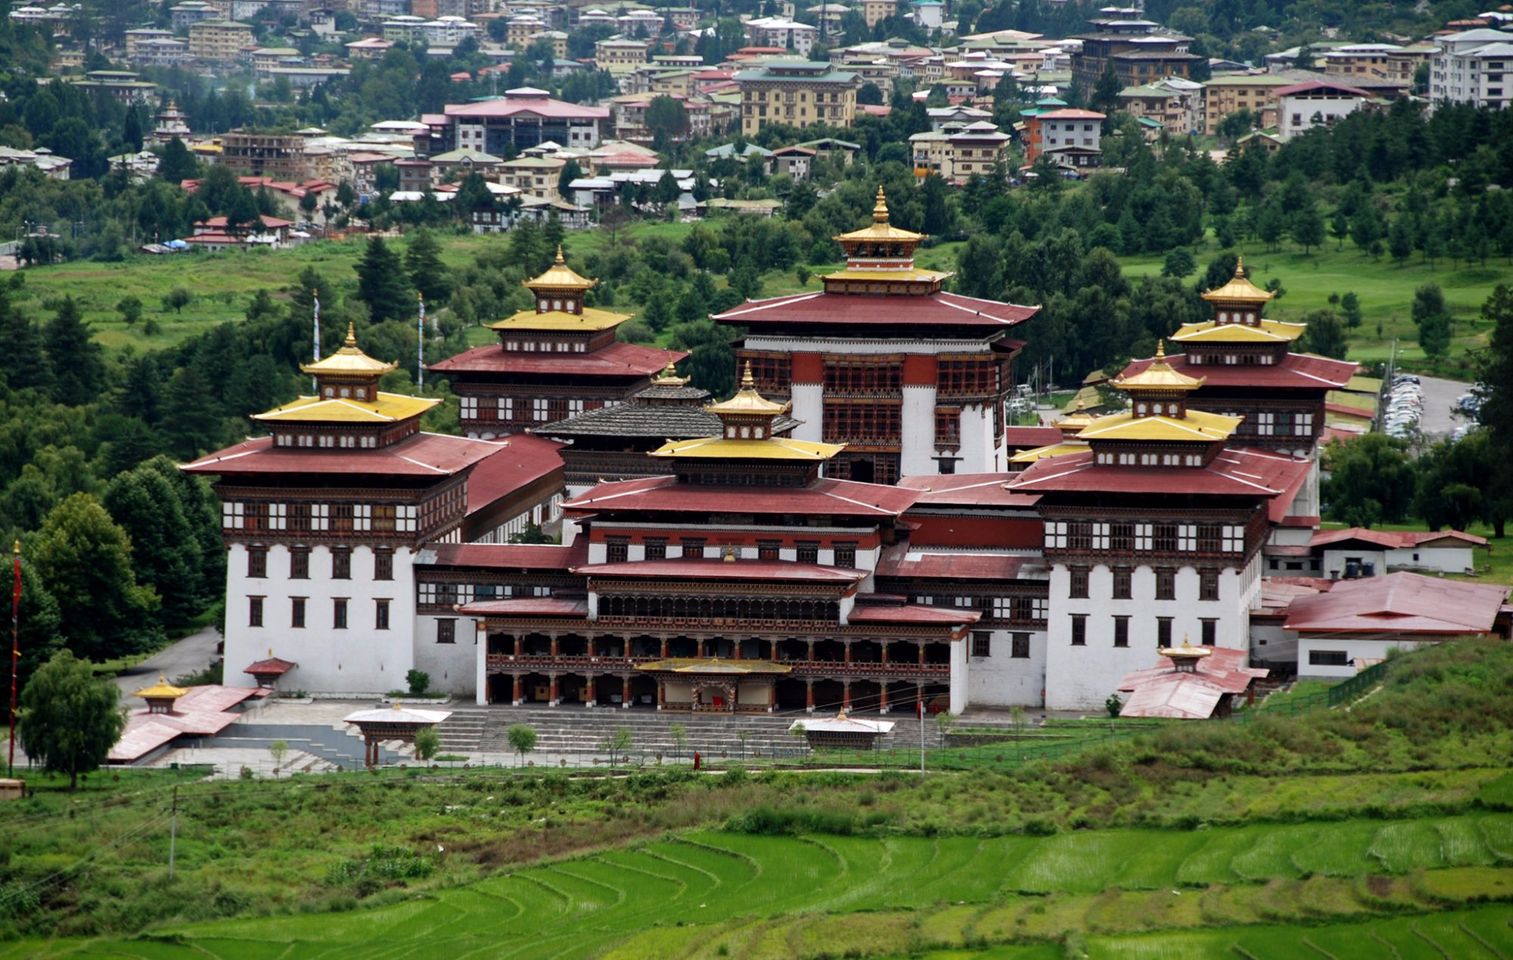 TASHICHHO DZONG  It was first constructed in 1216 A.D. by Lama Gyalwa Lhanangpa where Dechen Pho